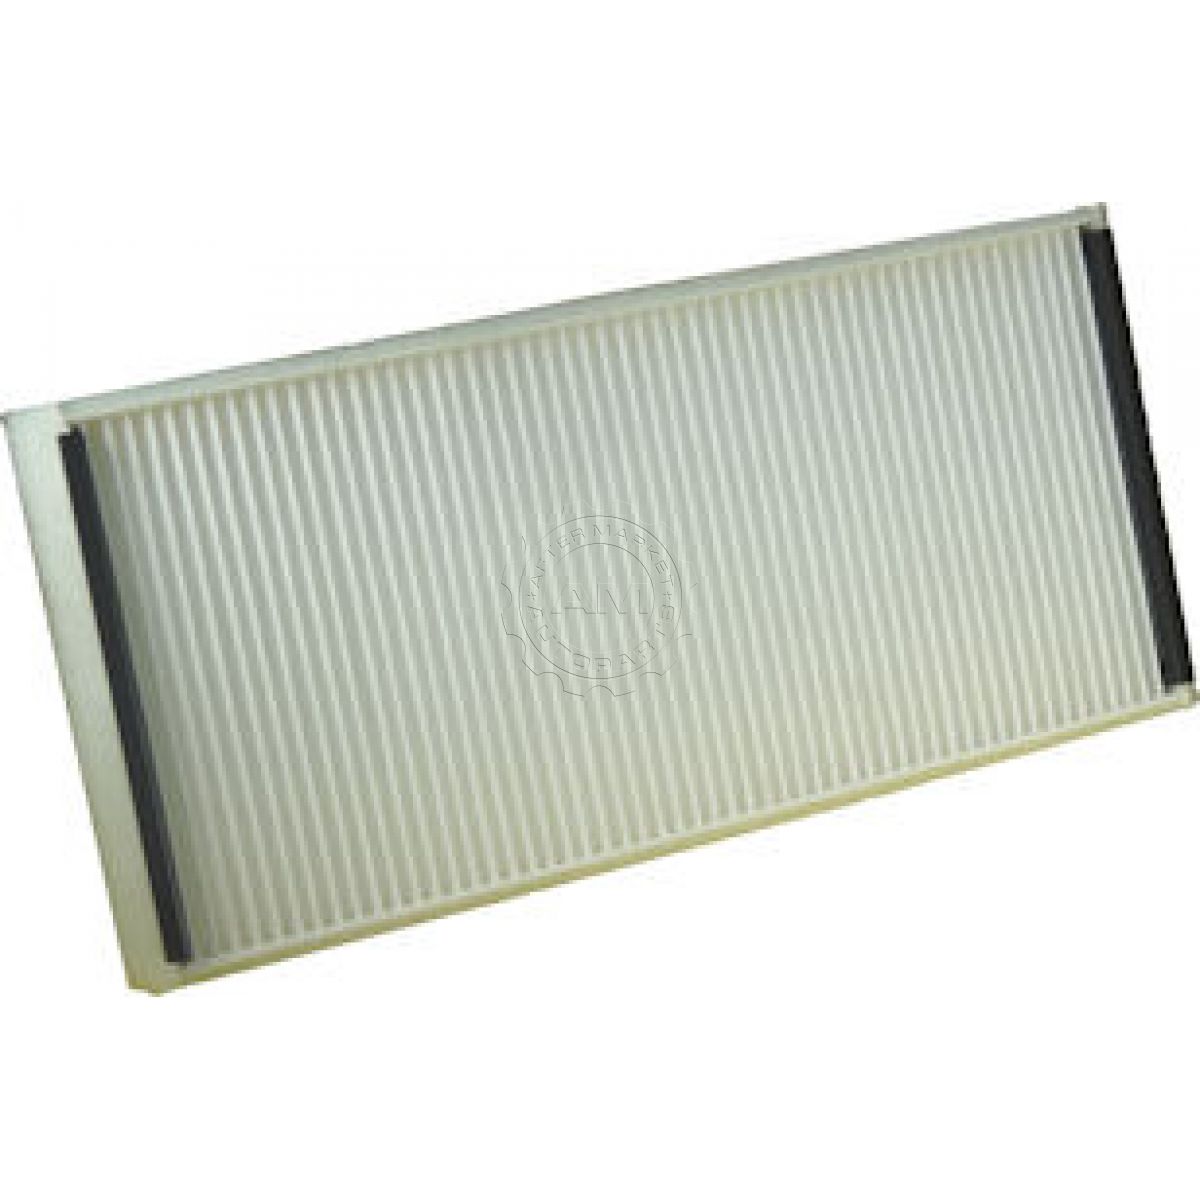 C15389 CABIN AIR FILTER FOR FORD FREESTAR WINDSTAR MERCURY MONTEREY PACKAGE OF 3 